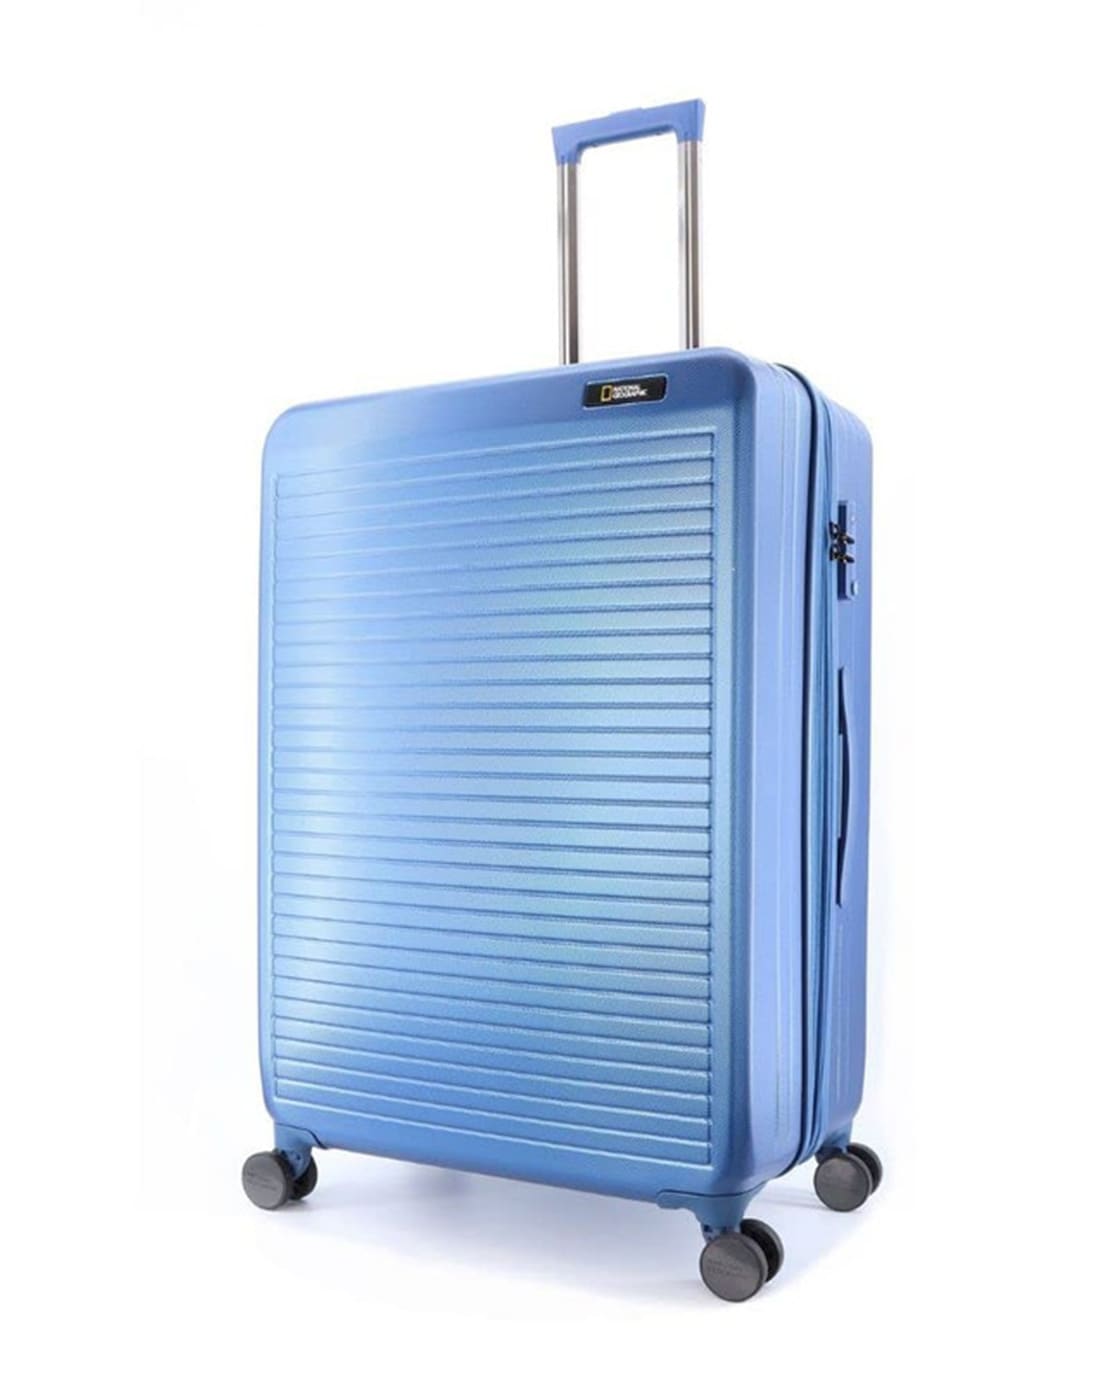 Share 82+ small cabin luggage bag best - in.cdgdbentre